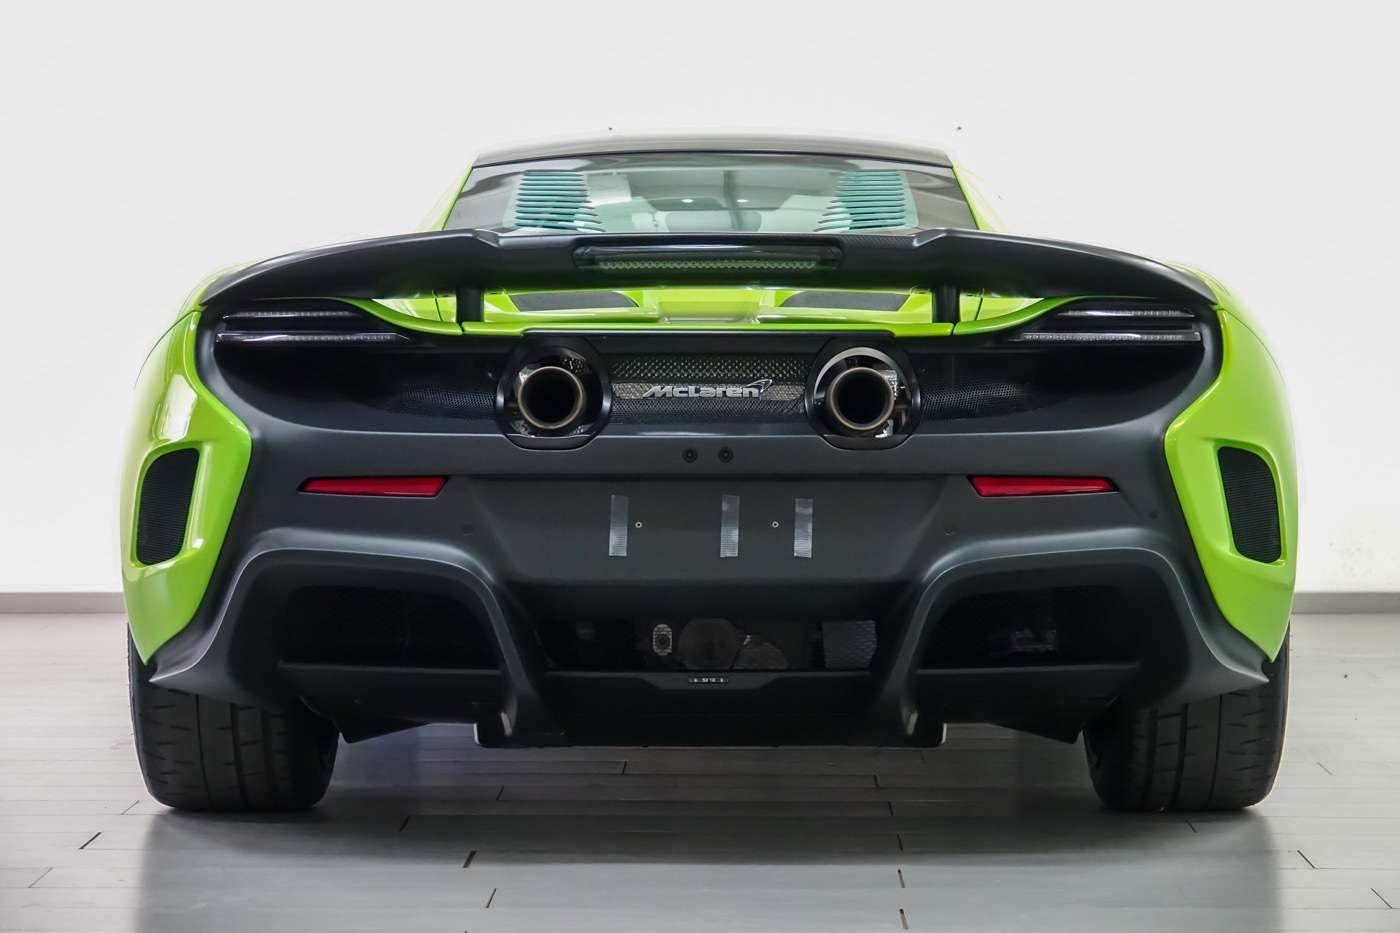 McLaren 675LT Coupe in Green used in Ravenna - Ra for € 268,000.-